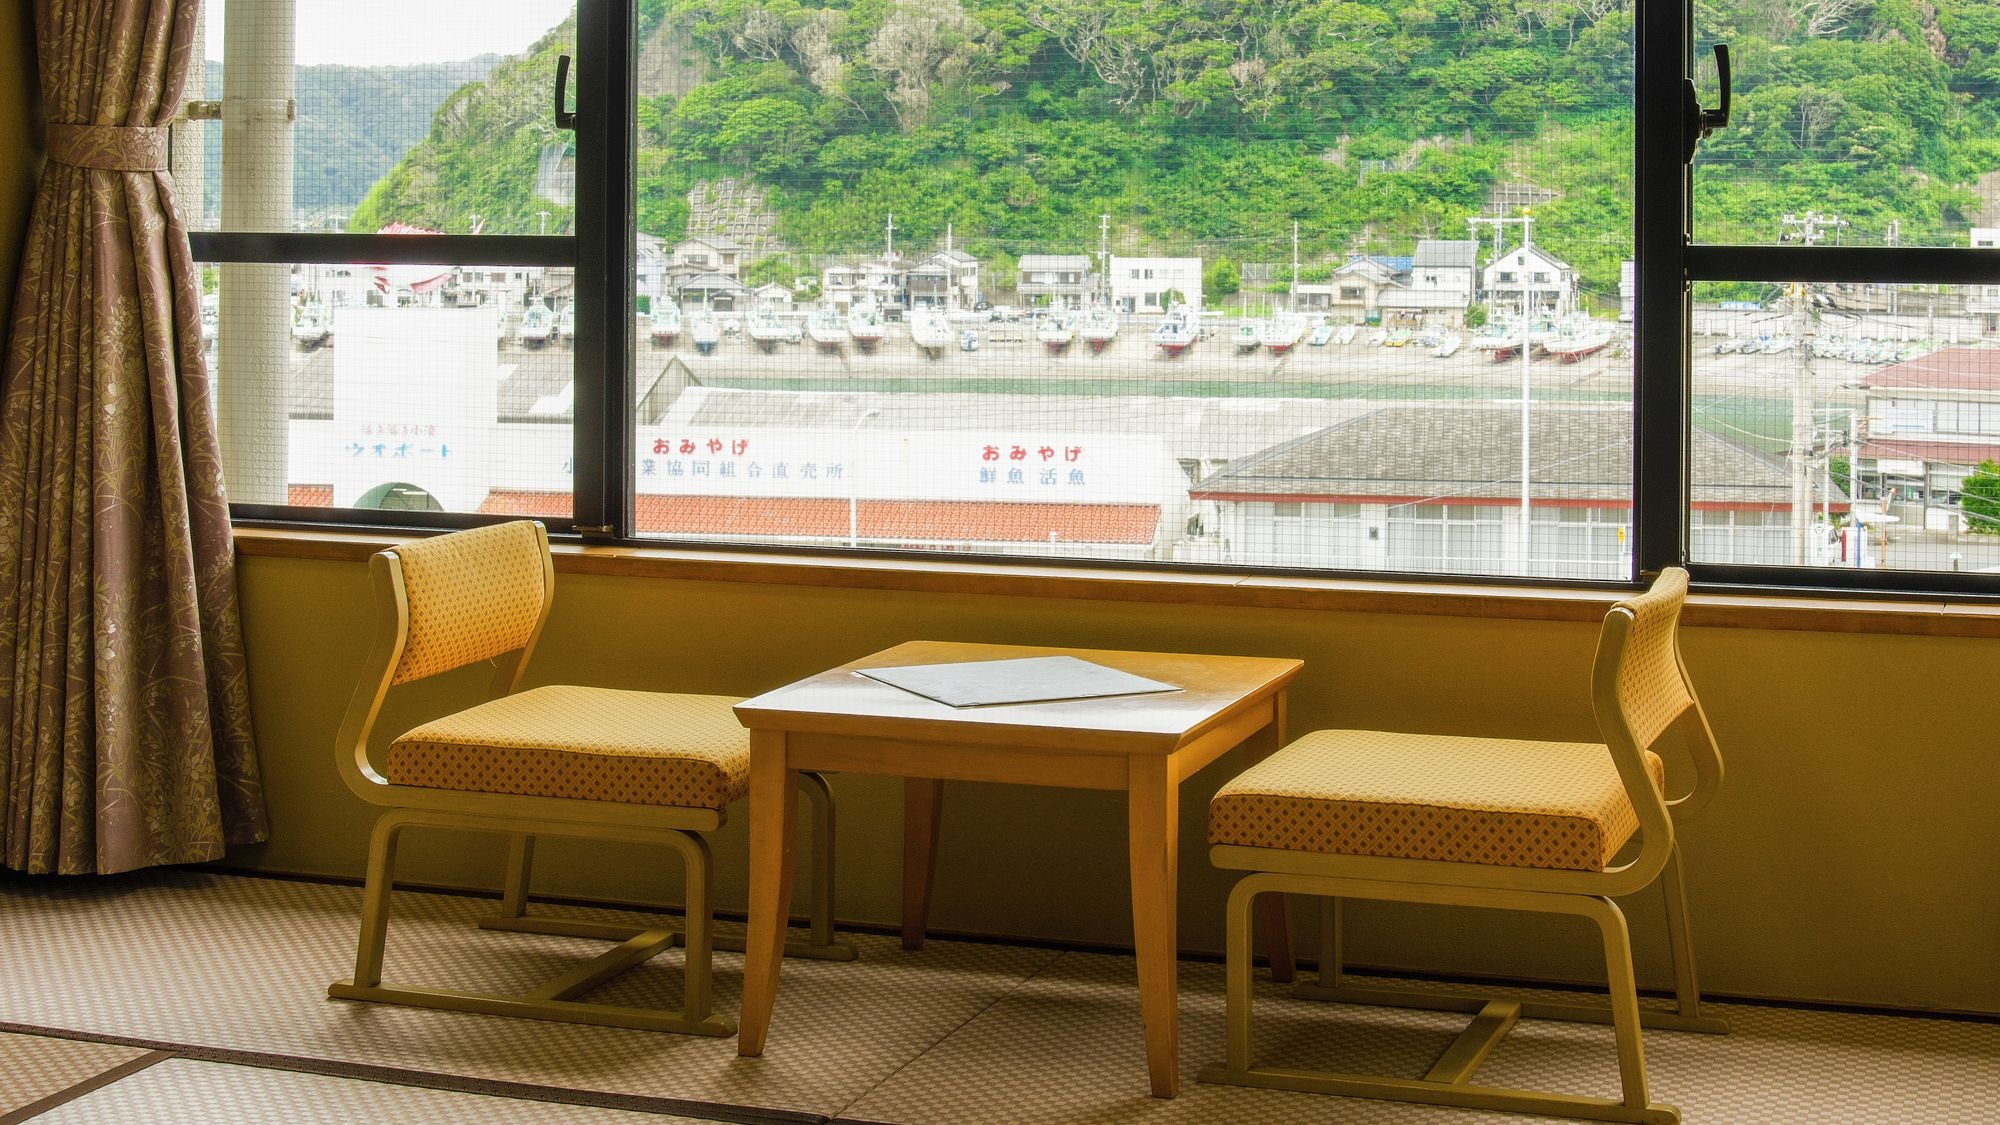 [Yumetei] Japanese-style room on the harbor side 10 tatami mats <Harbor view> This is a guest room on the harbor side for those who do not care about the view. I can hardly see the sea